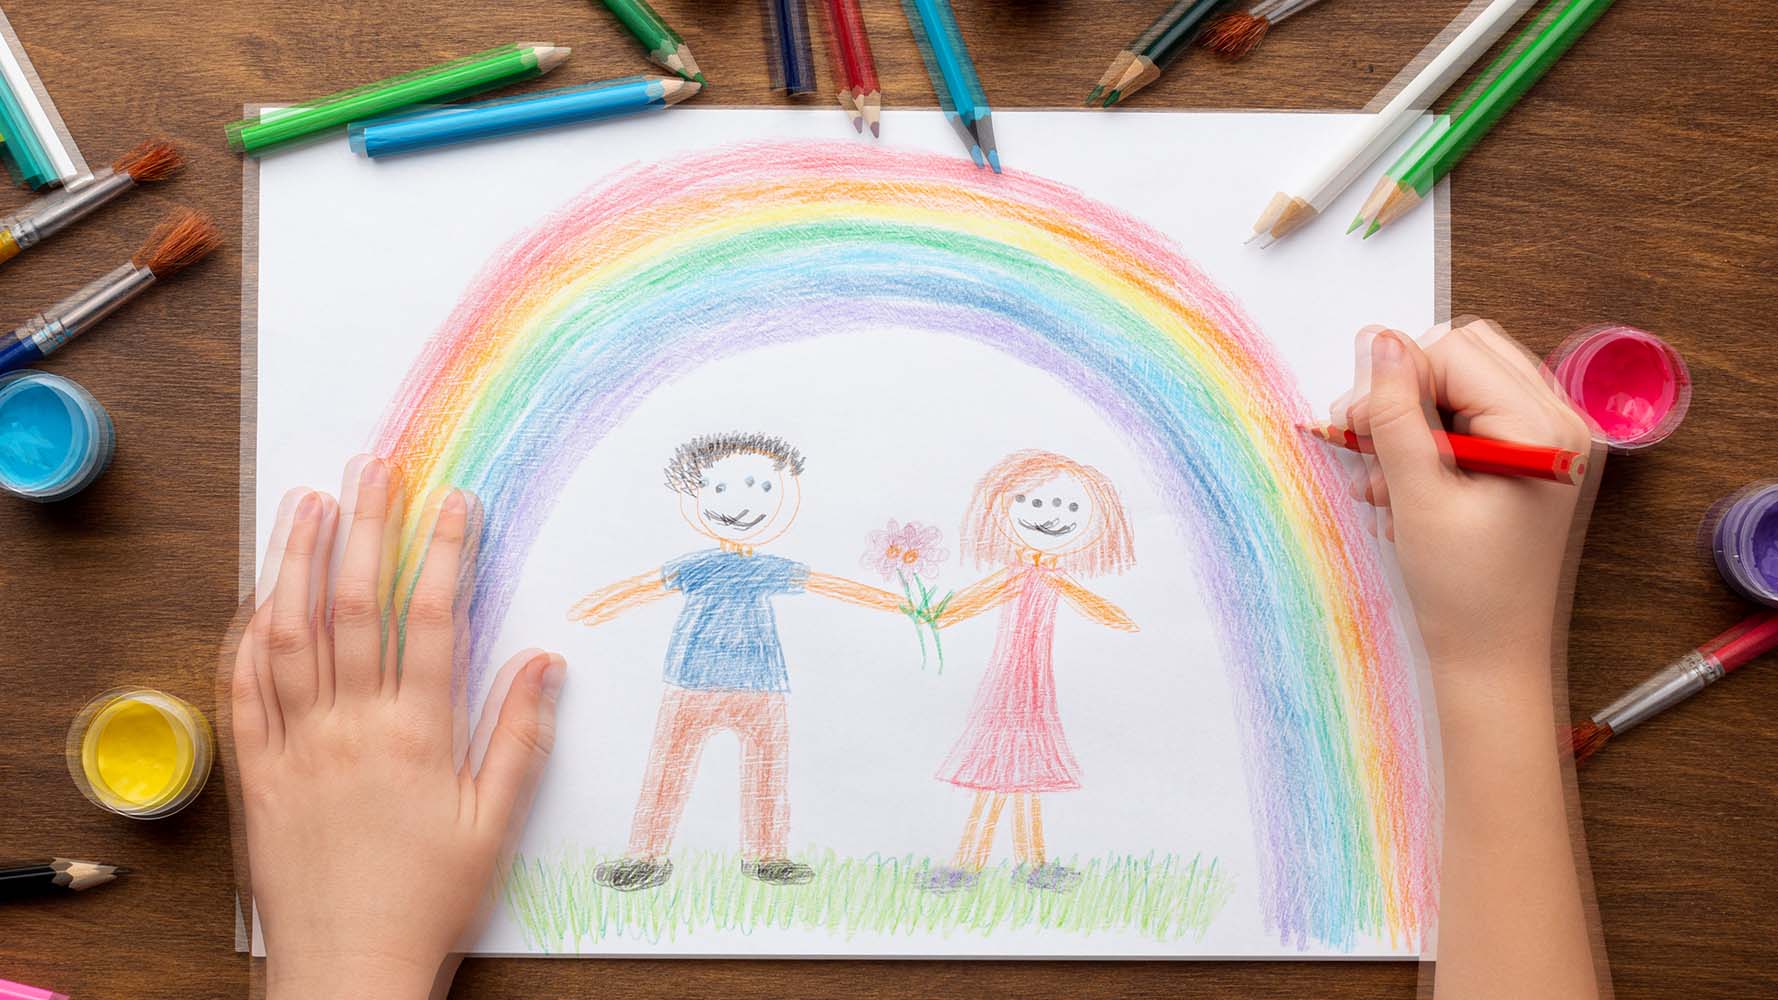 Image of a child's drawing which appears distorted and 'doubled' to represent how a person with Nystagmus might experience this view.